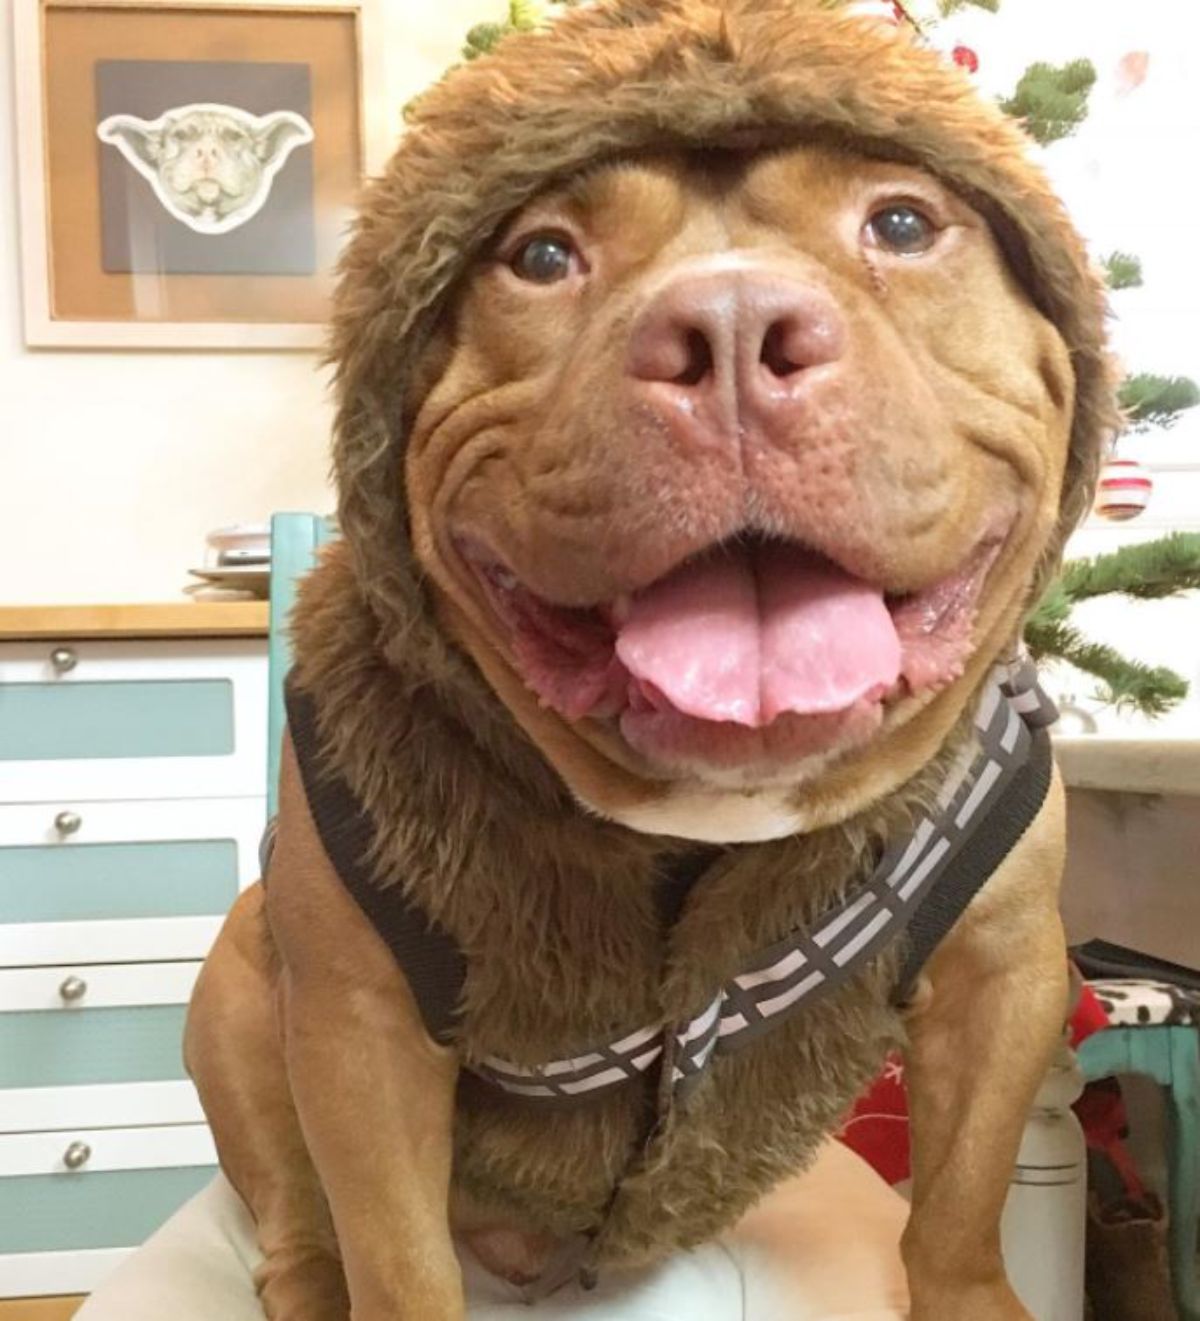 smiling brown and white pitbull in a fuzzy brown coat